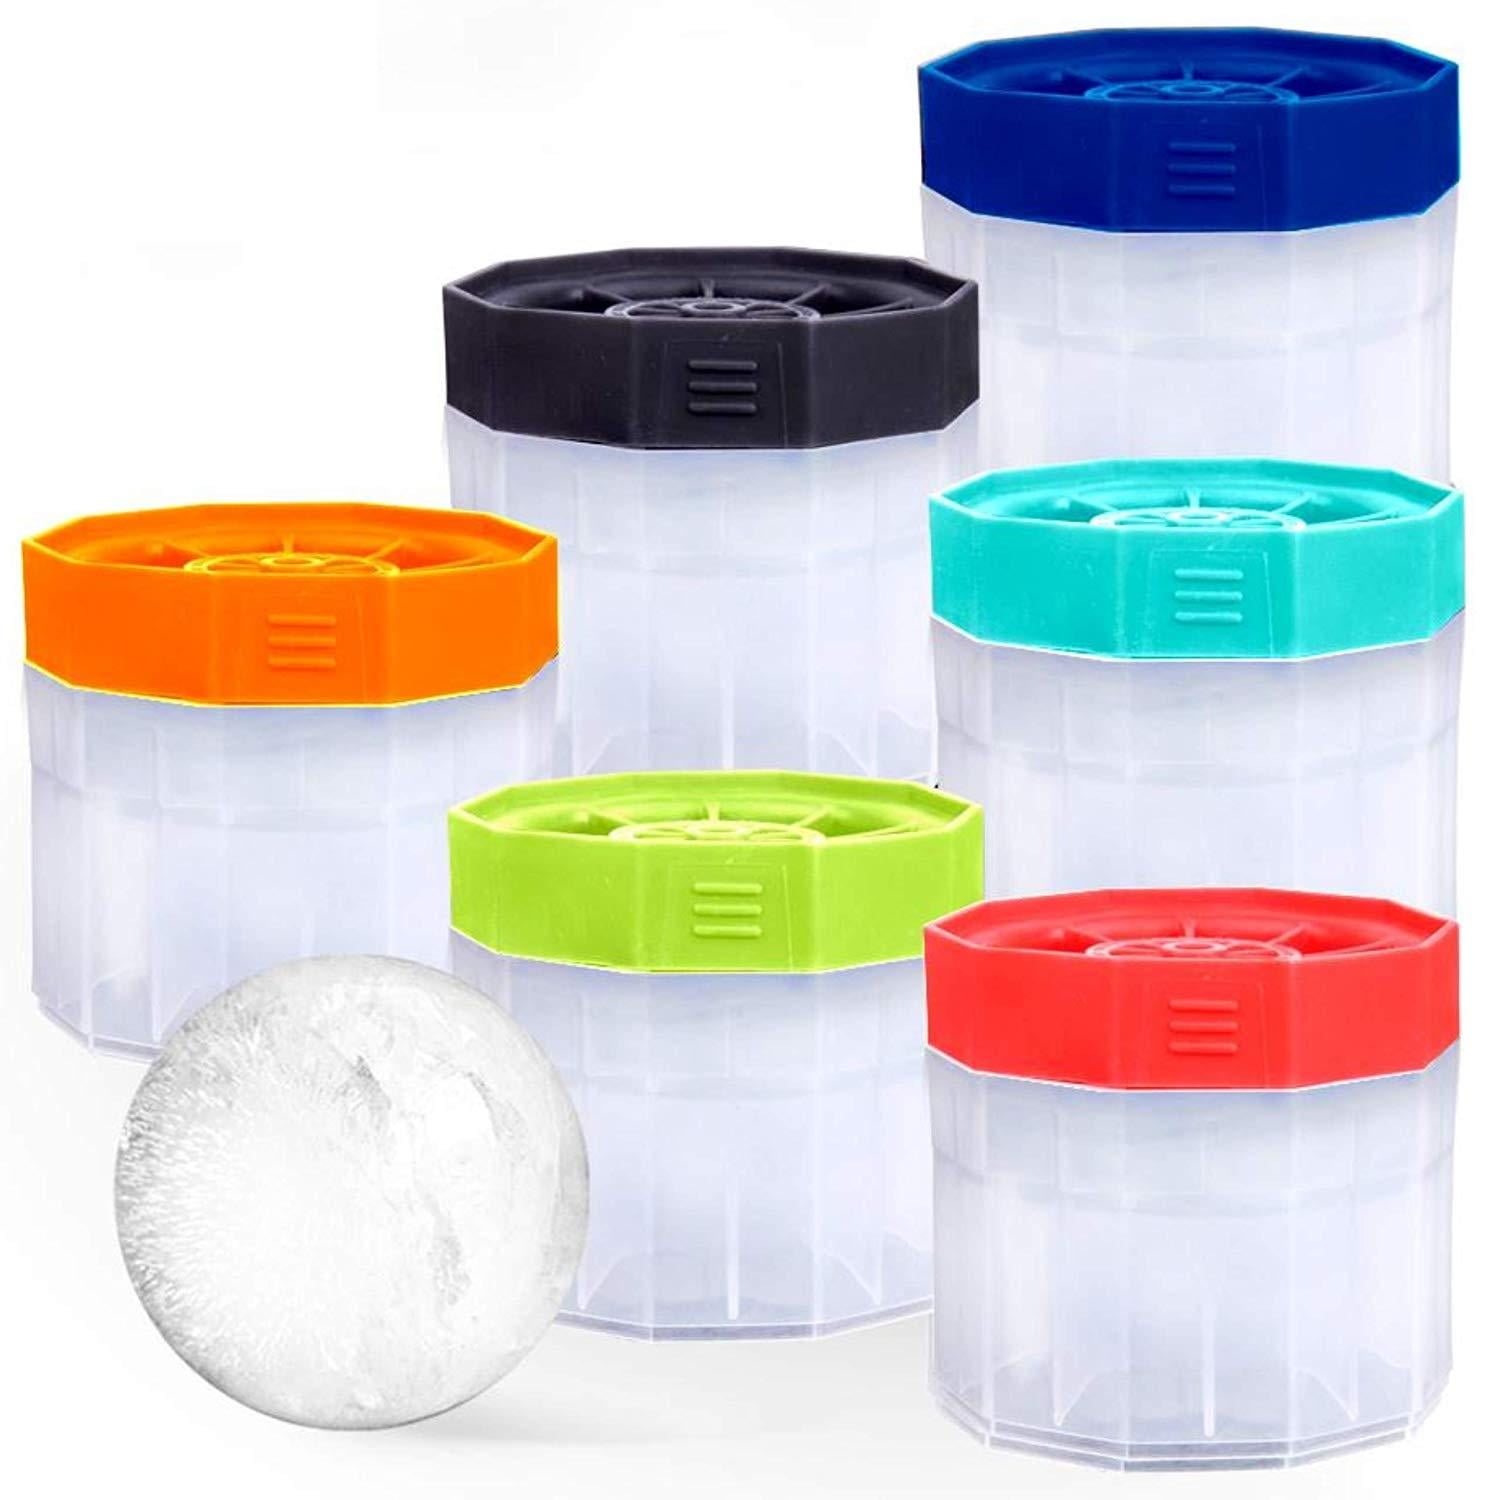 Larger Than Ice Sphere Trays Which ONLY Create 2 Ice Balls Create Extra Large 2.5 Ice Spheres Arctic Chill 4 Pack 